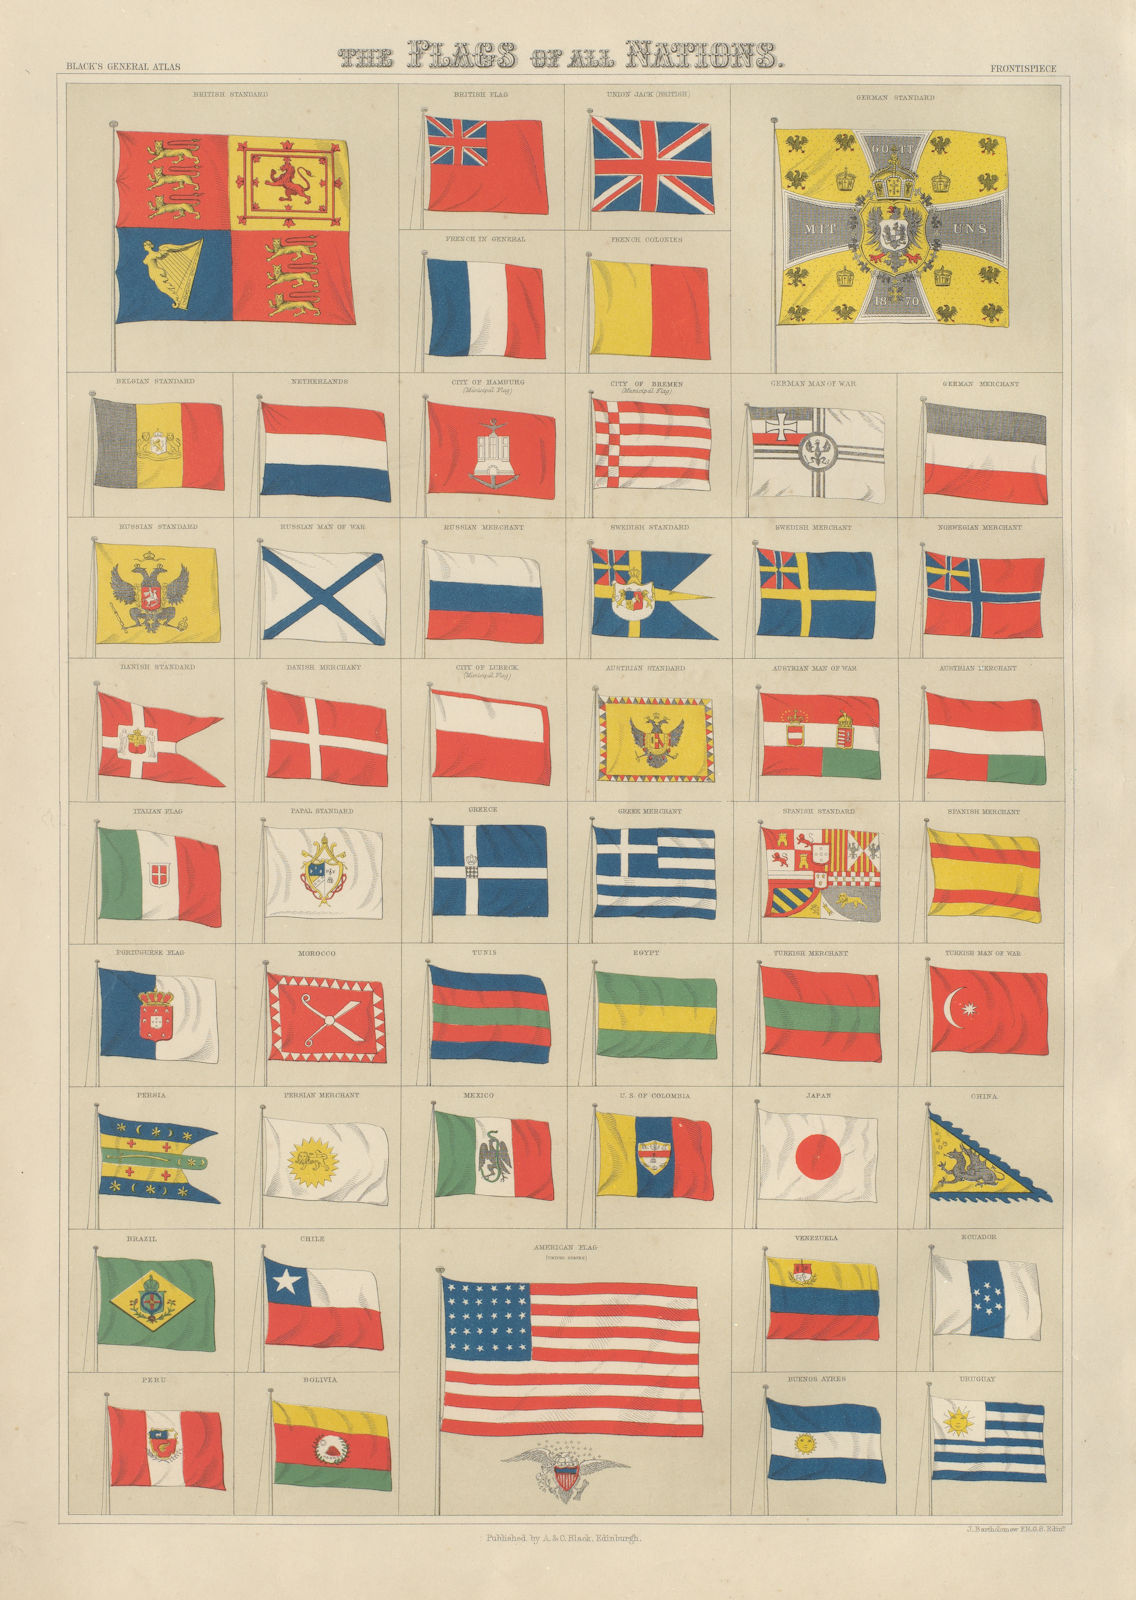 Associate Product Flags of all Nations. Imperial standards merchants cities. BARTHOLOMEW 1882